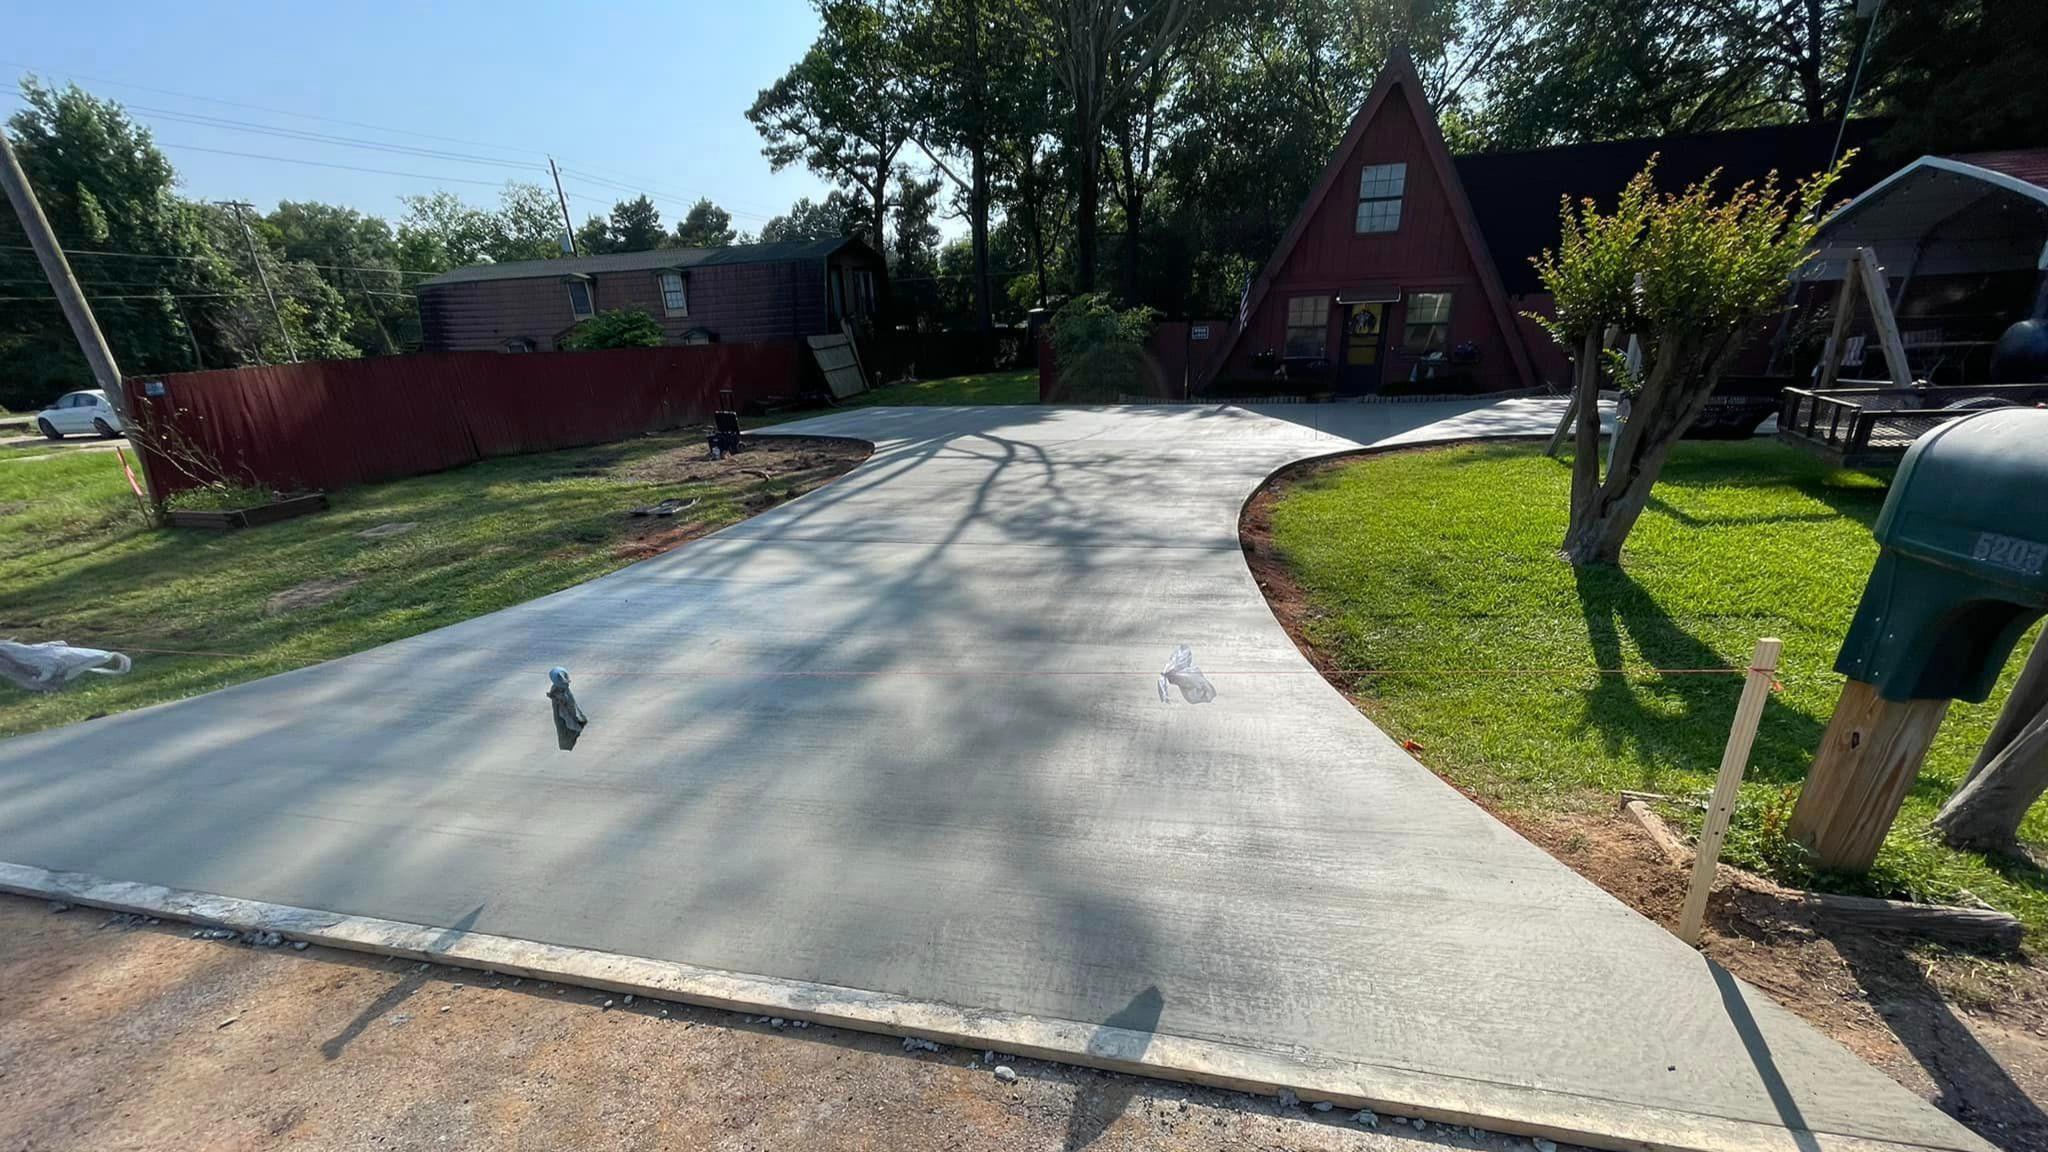 When it comes to driveway installation, ETX Concrete Works is your trusted choice for high-quality, long-lasting results. Our skilled professionals are experts in creating functional and visually appealing driveways that complement your home or business. Count on us to transform your property's entrance with a well-executed driveway installation.